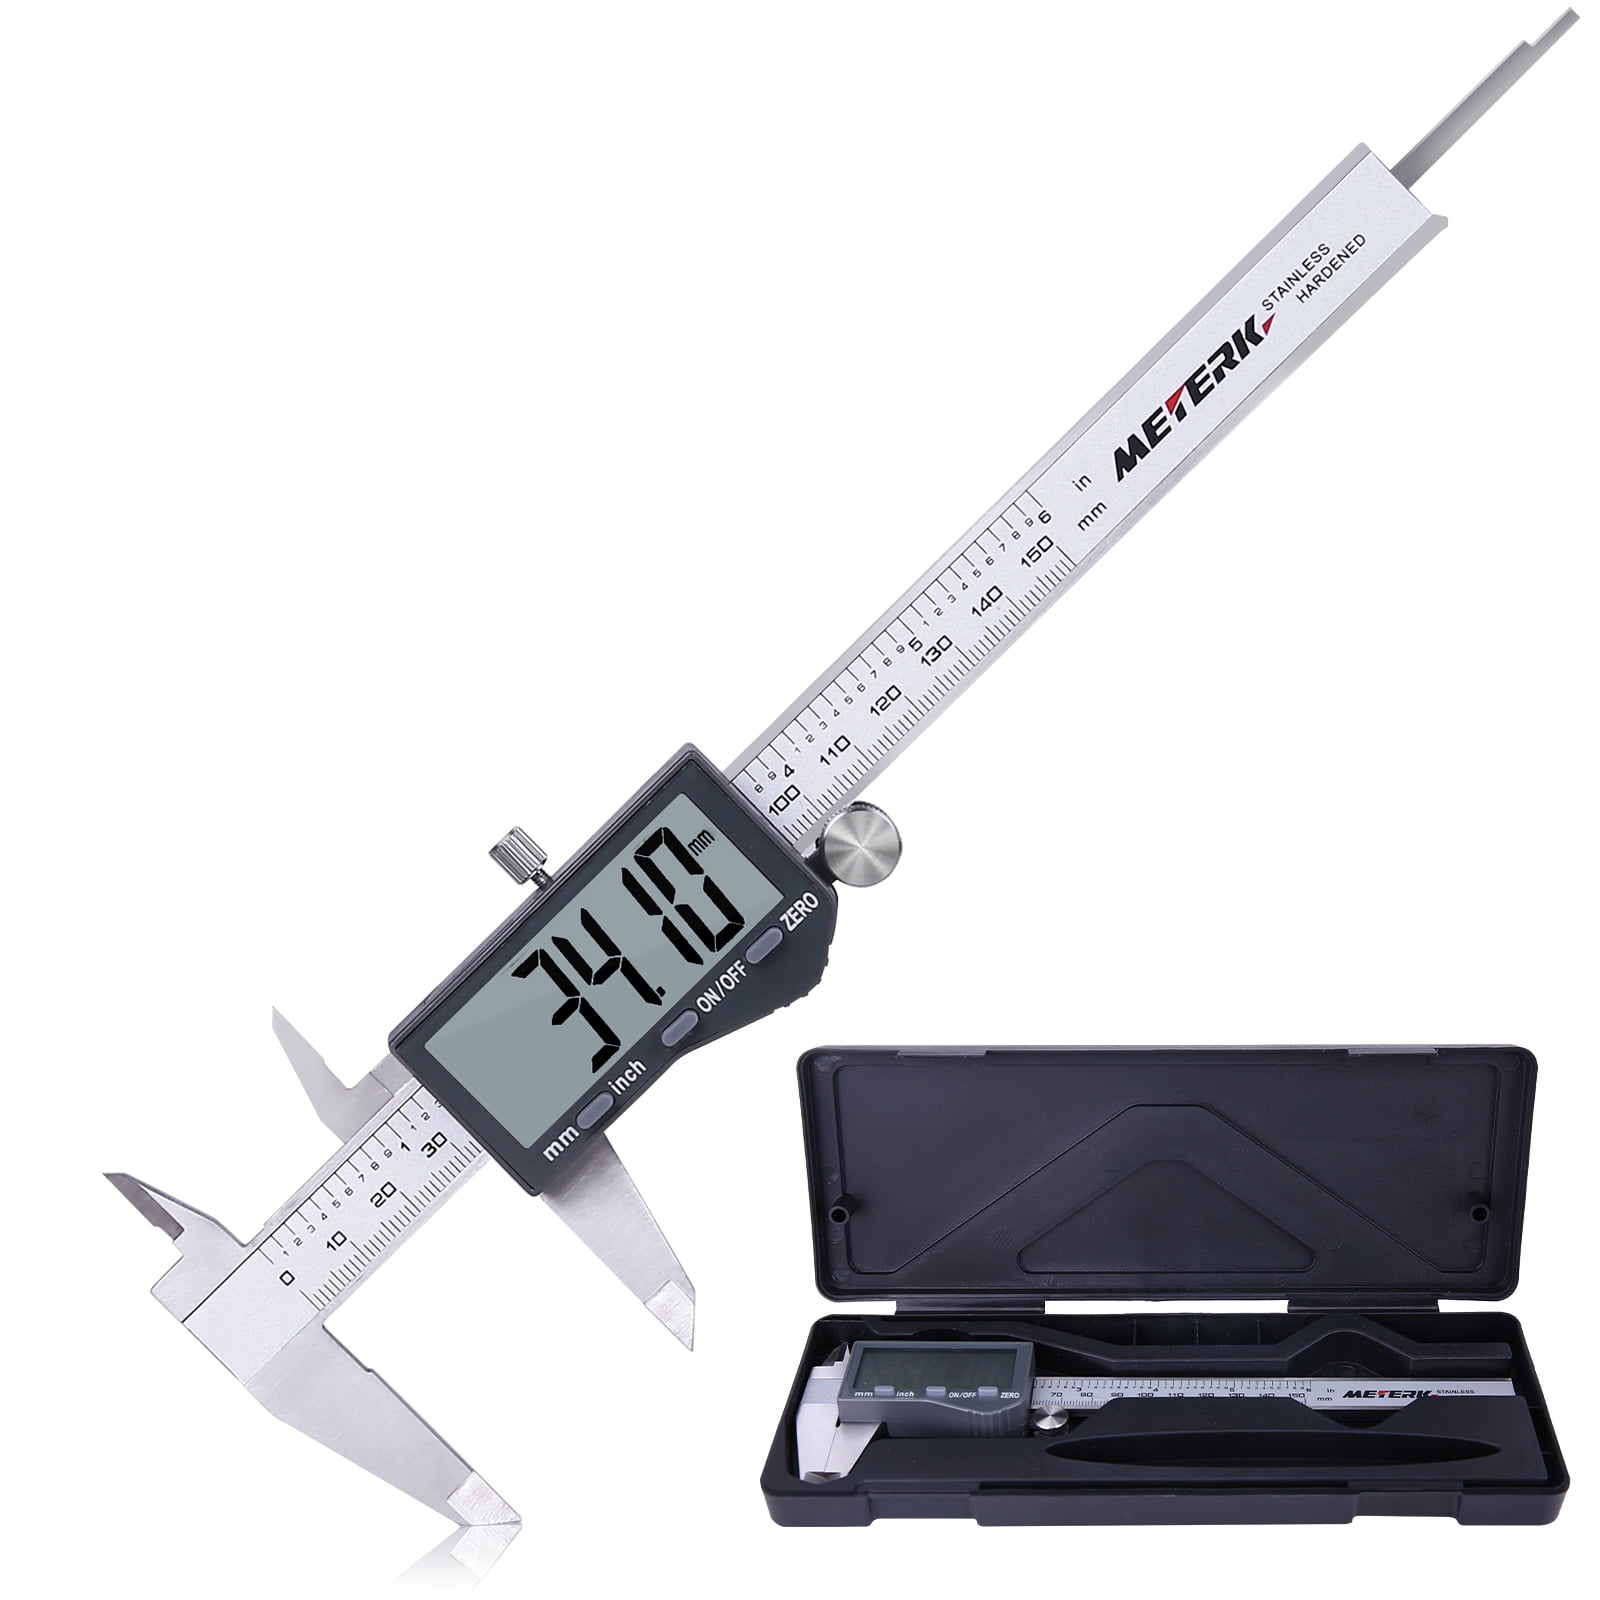 8" Digital Electronic Caliper Precision Stainless Inch/Metric LCD Dial w/ Case 